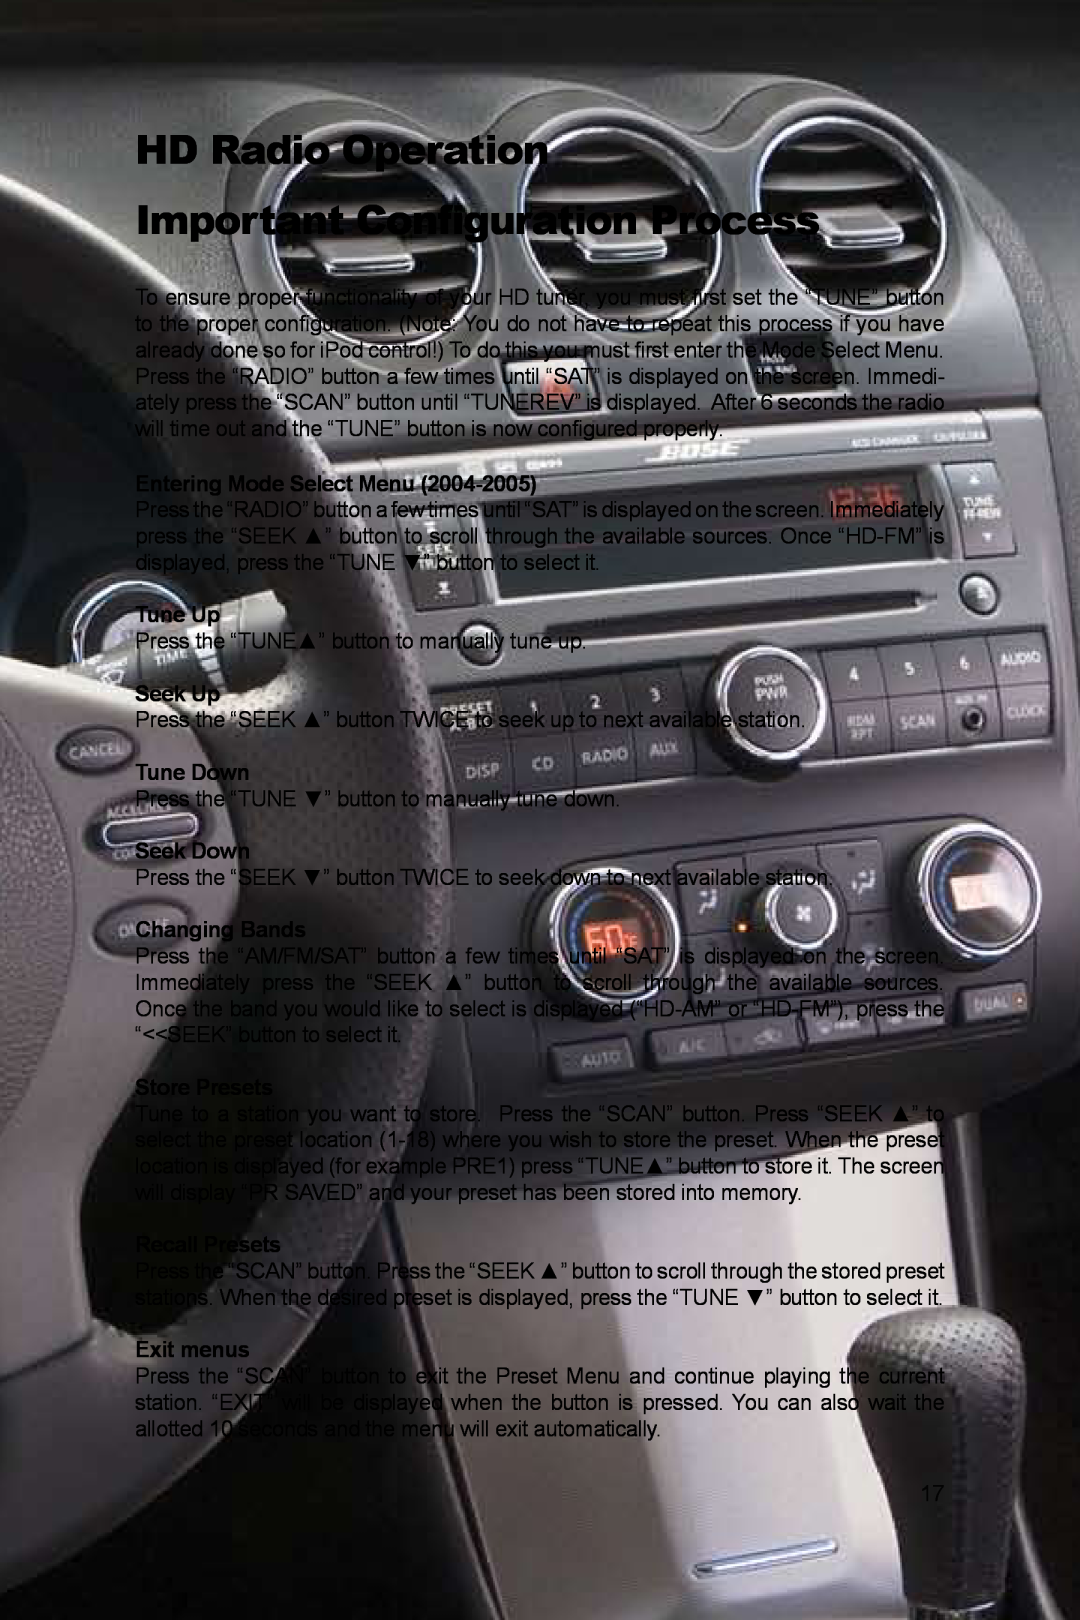 Peripheral Electronics PGHNI2 HD Radio Operation, Important Configuration Process, Entering Mode Select Menu, Tune Up 